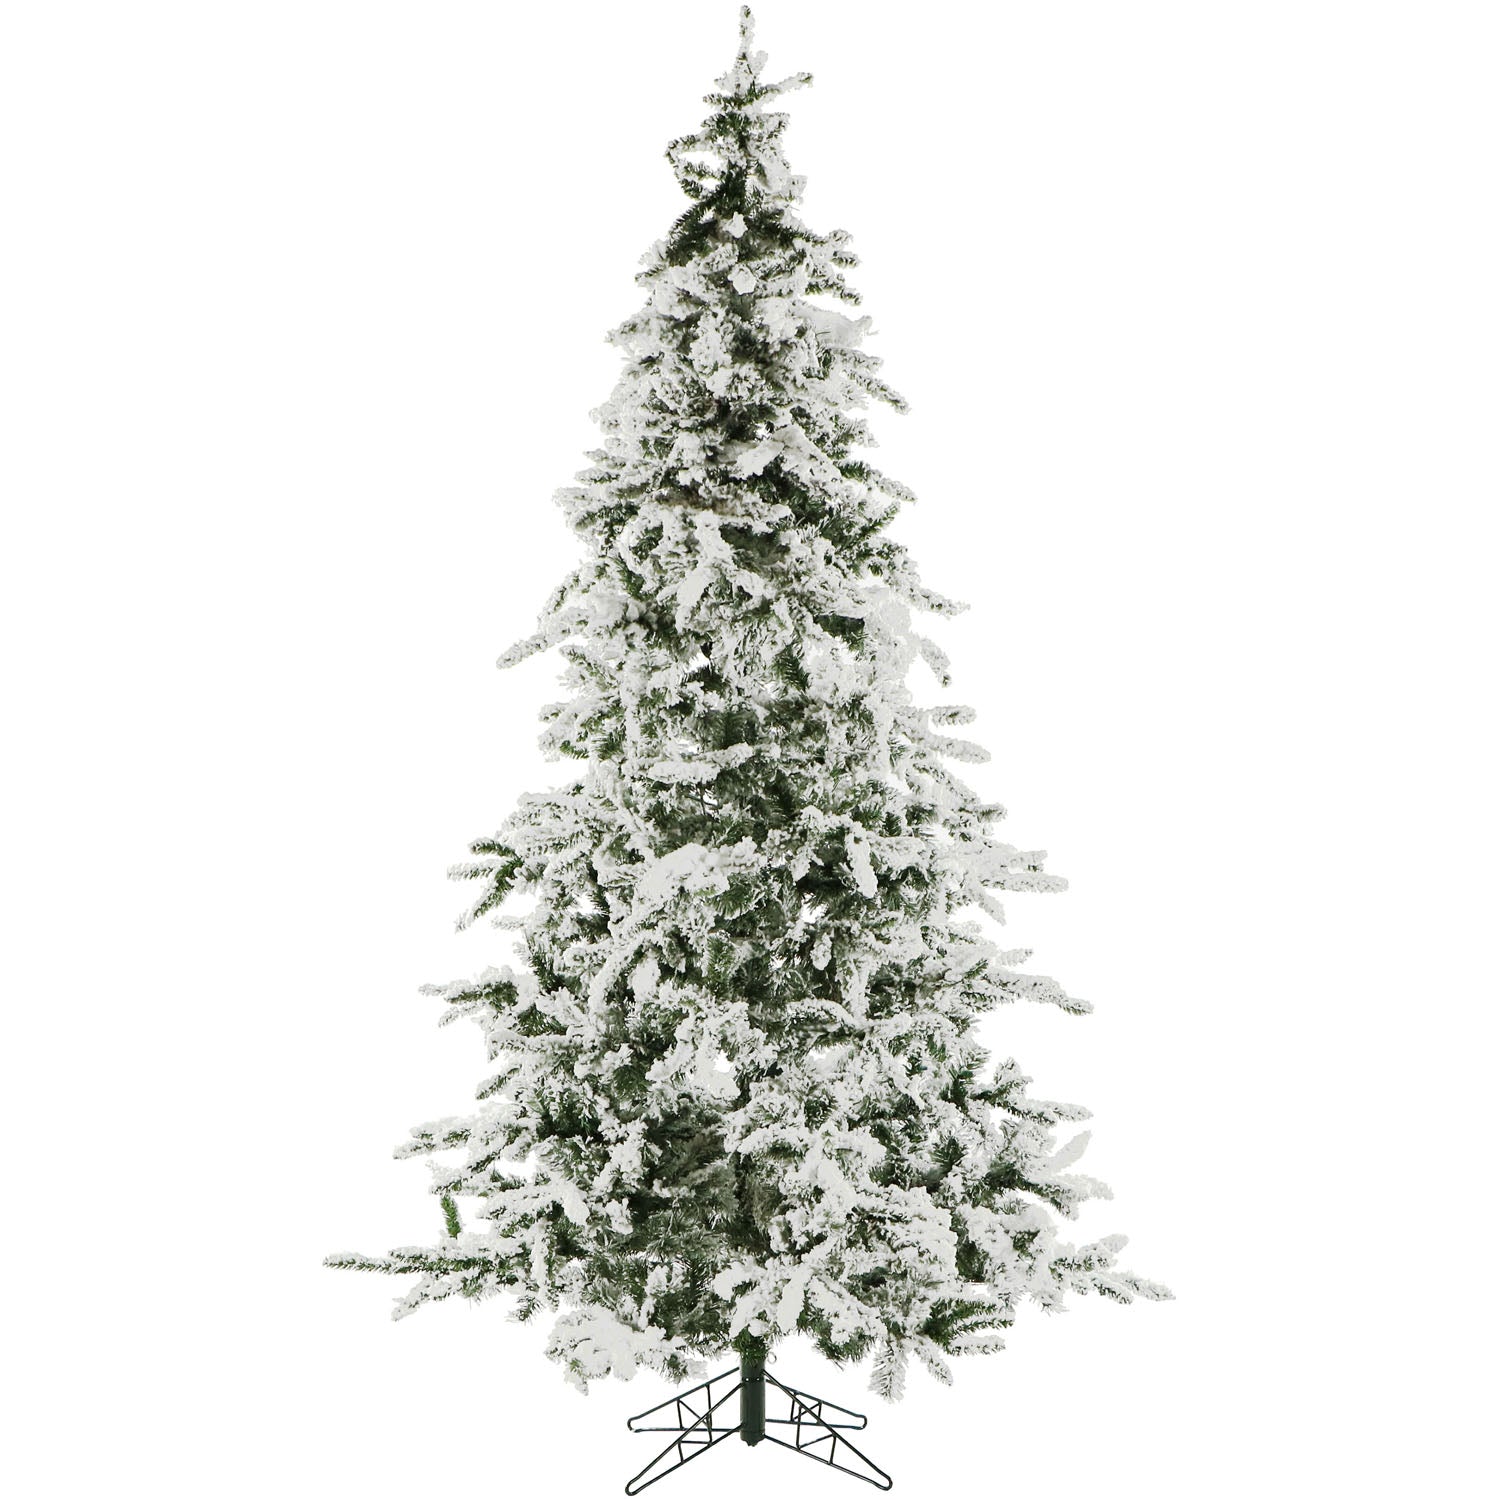 Christmas Time -  7.5-Ft. White Pine Snowy Artificial Christmas Tree with Clear LED String Lighting